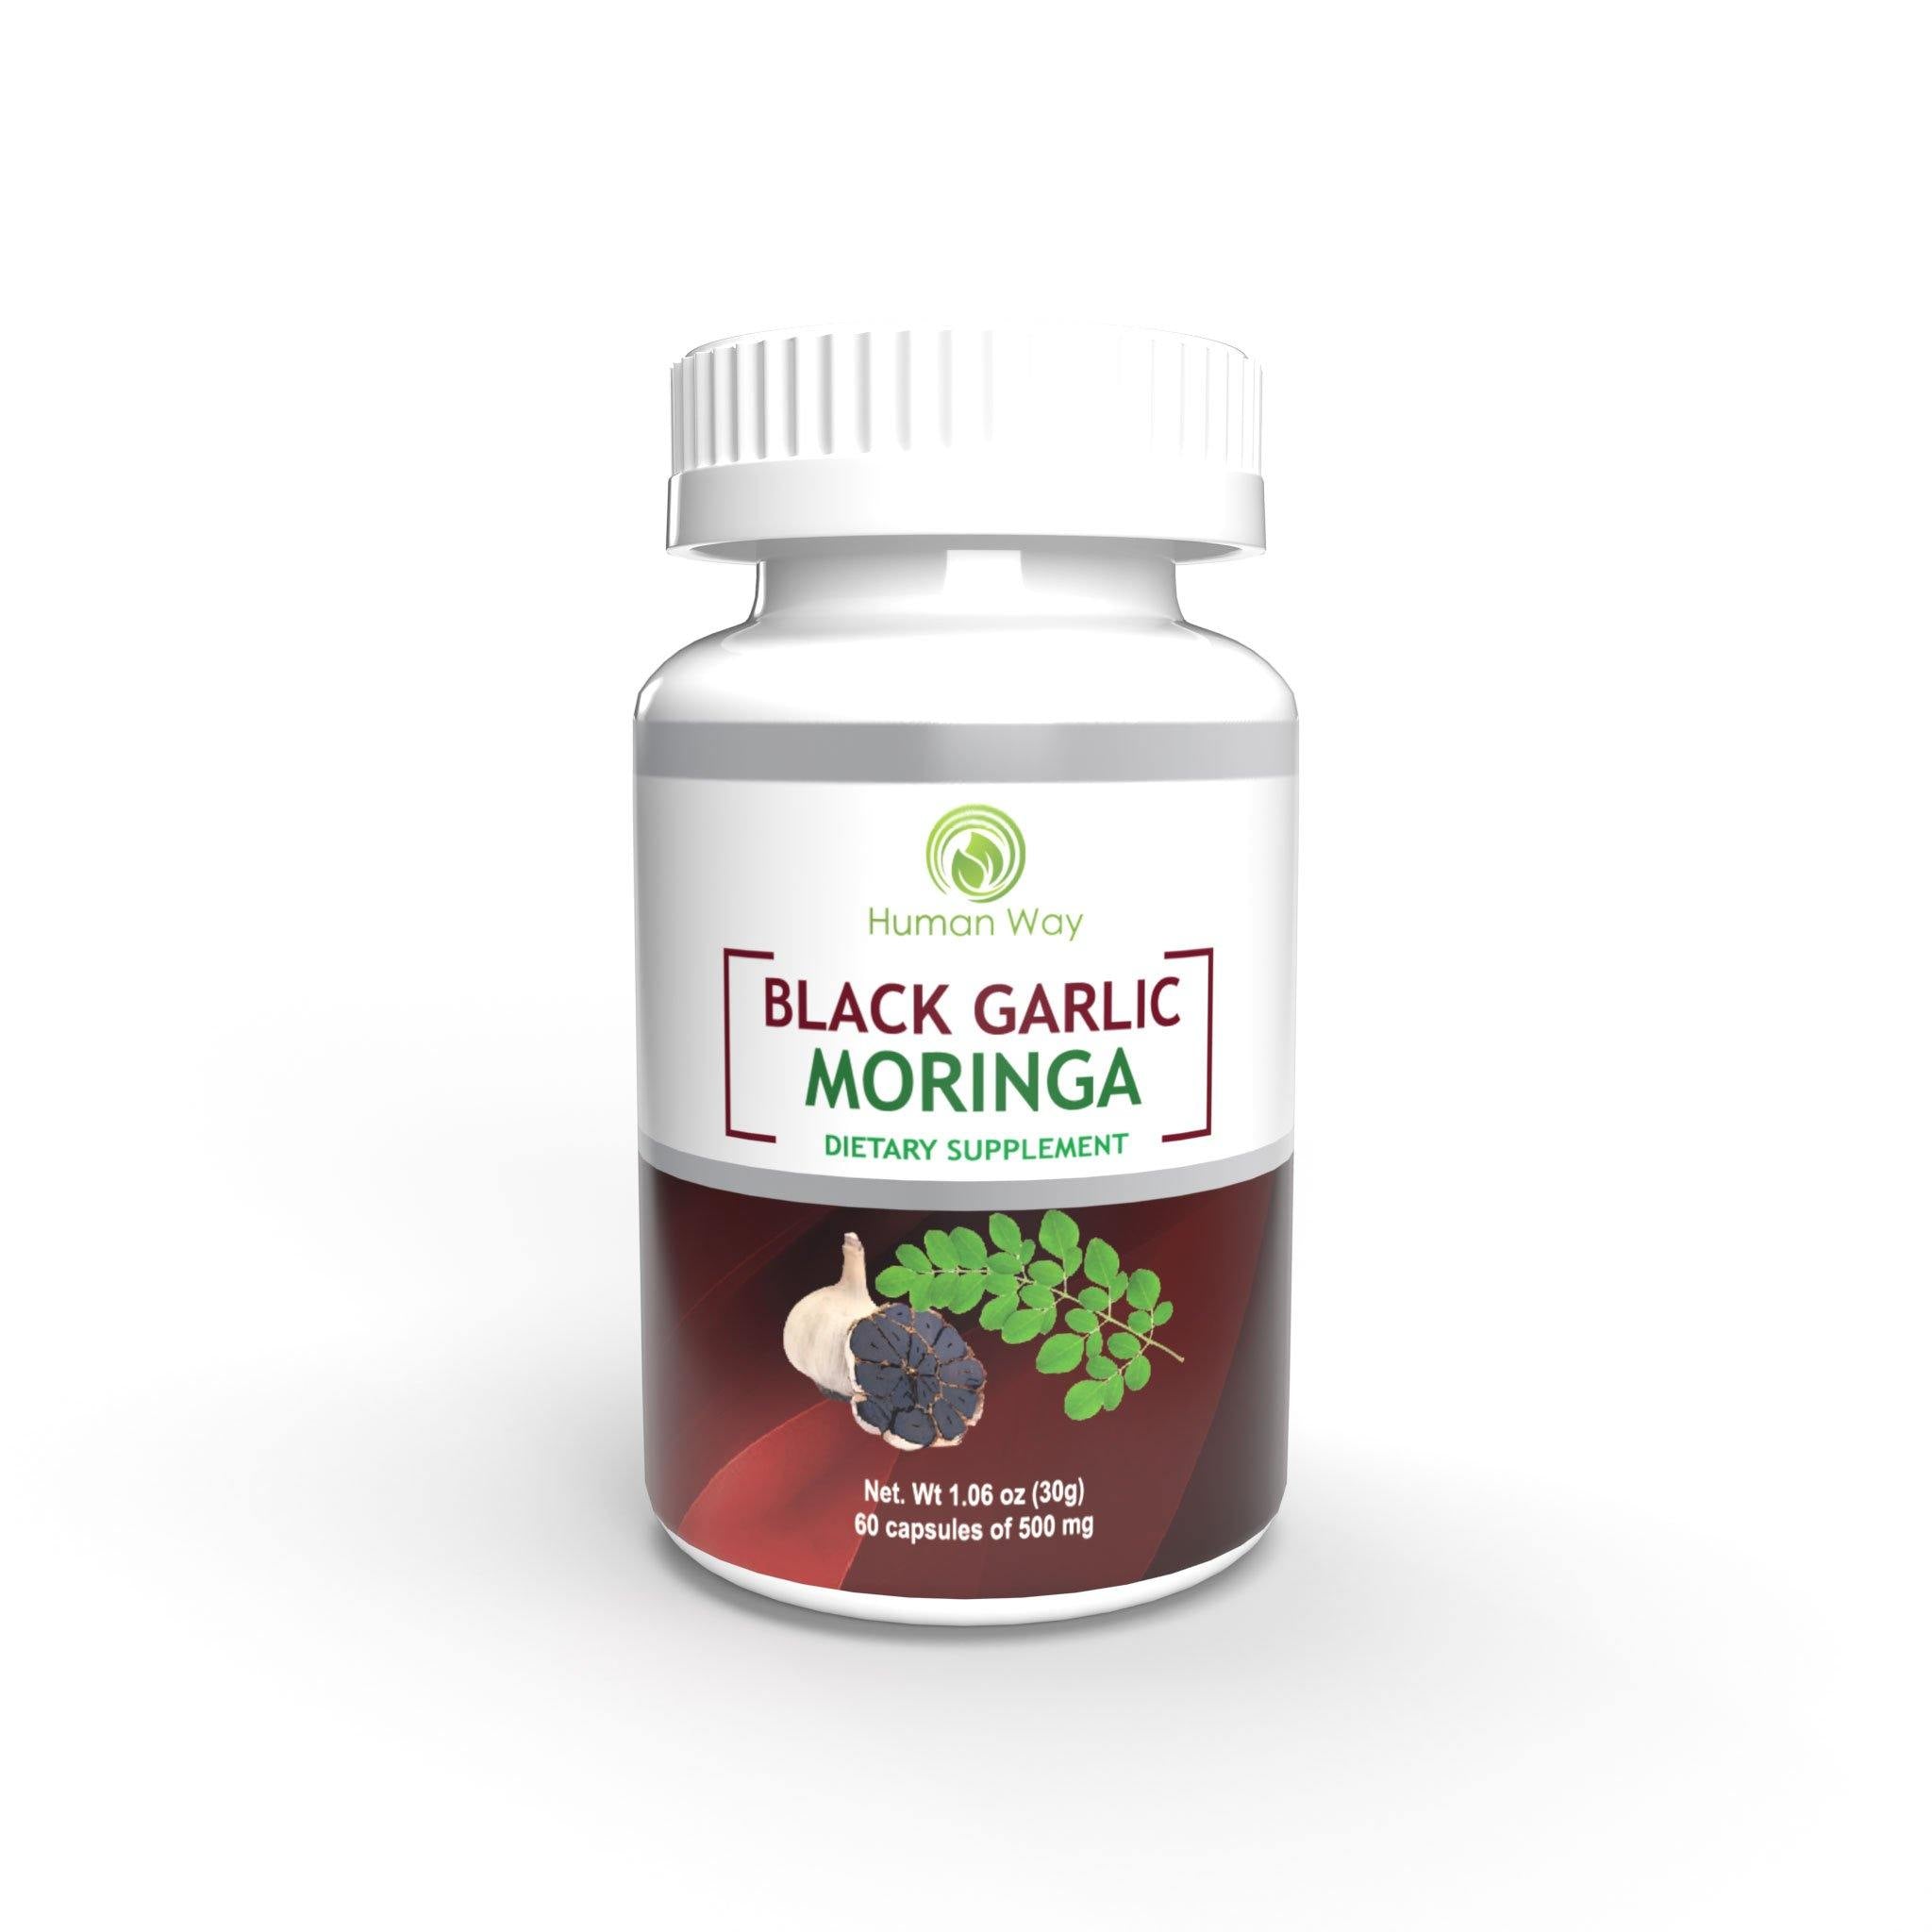  Ingredients Key Benefits Features Black garlic moringa has the ability to support immune function, provide antioxidant support and promote cardiovascular health. 